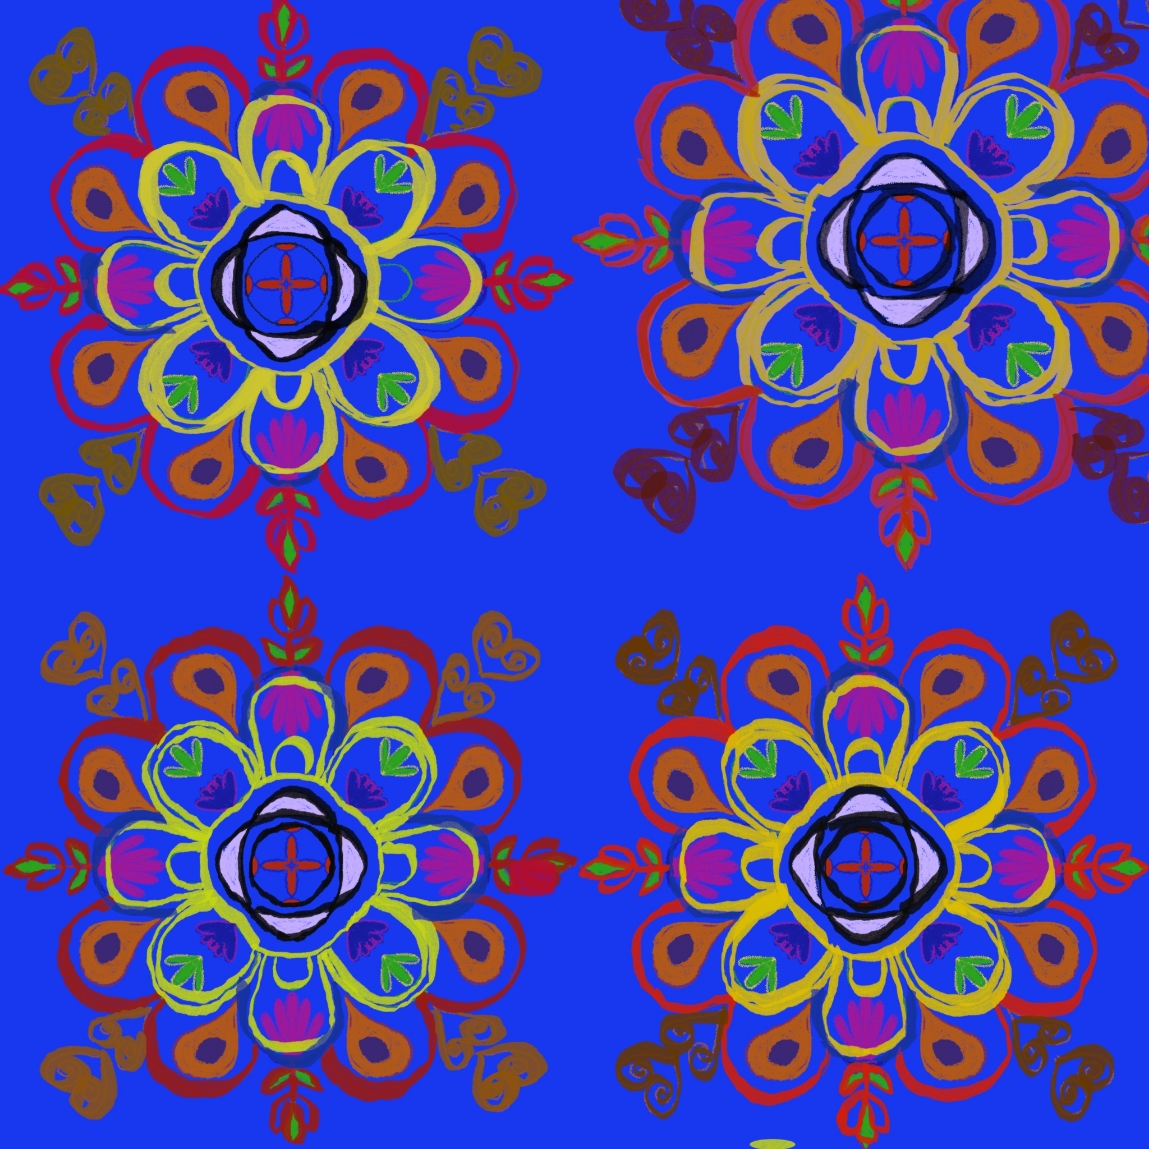 Digital drawing in a flower pattern, in blue, yellow, pinks and orange.